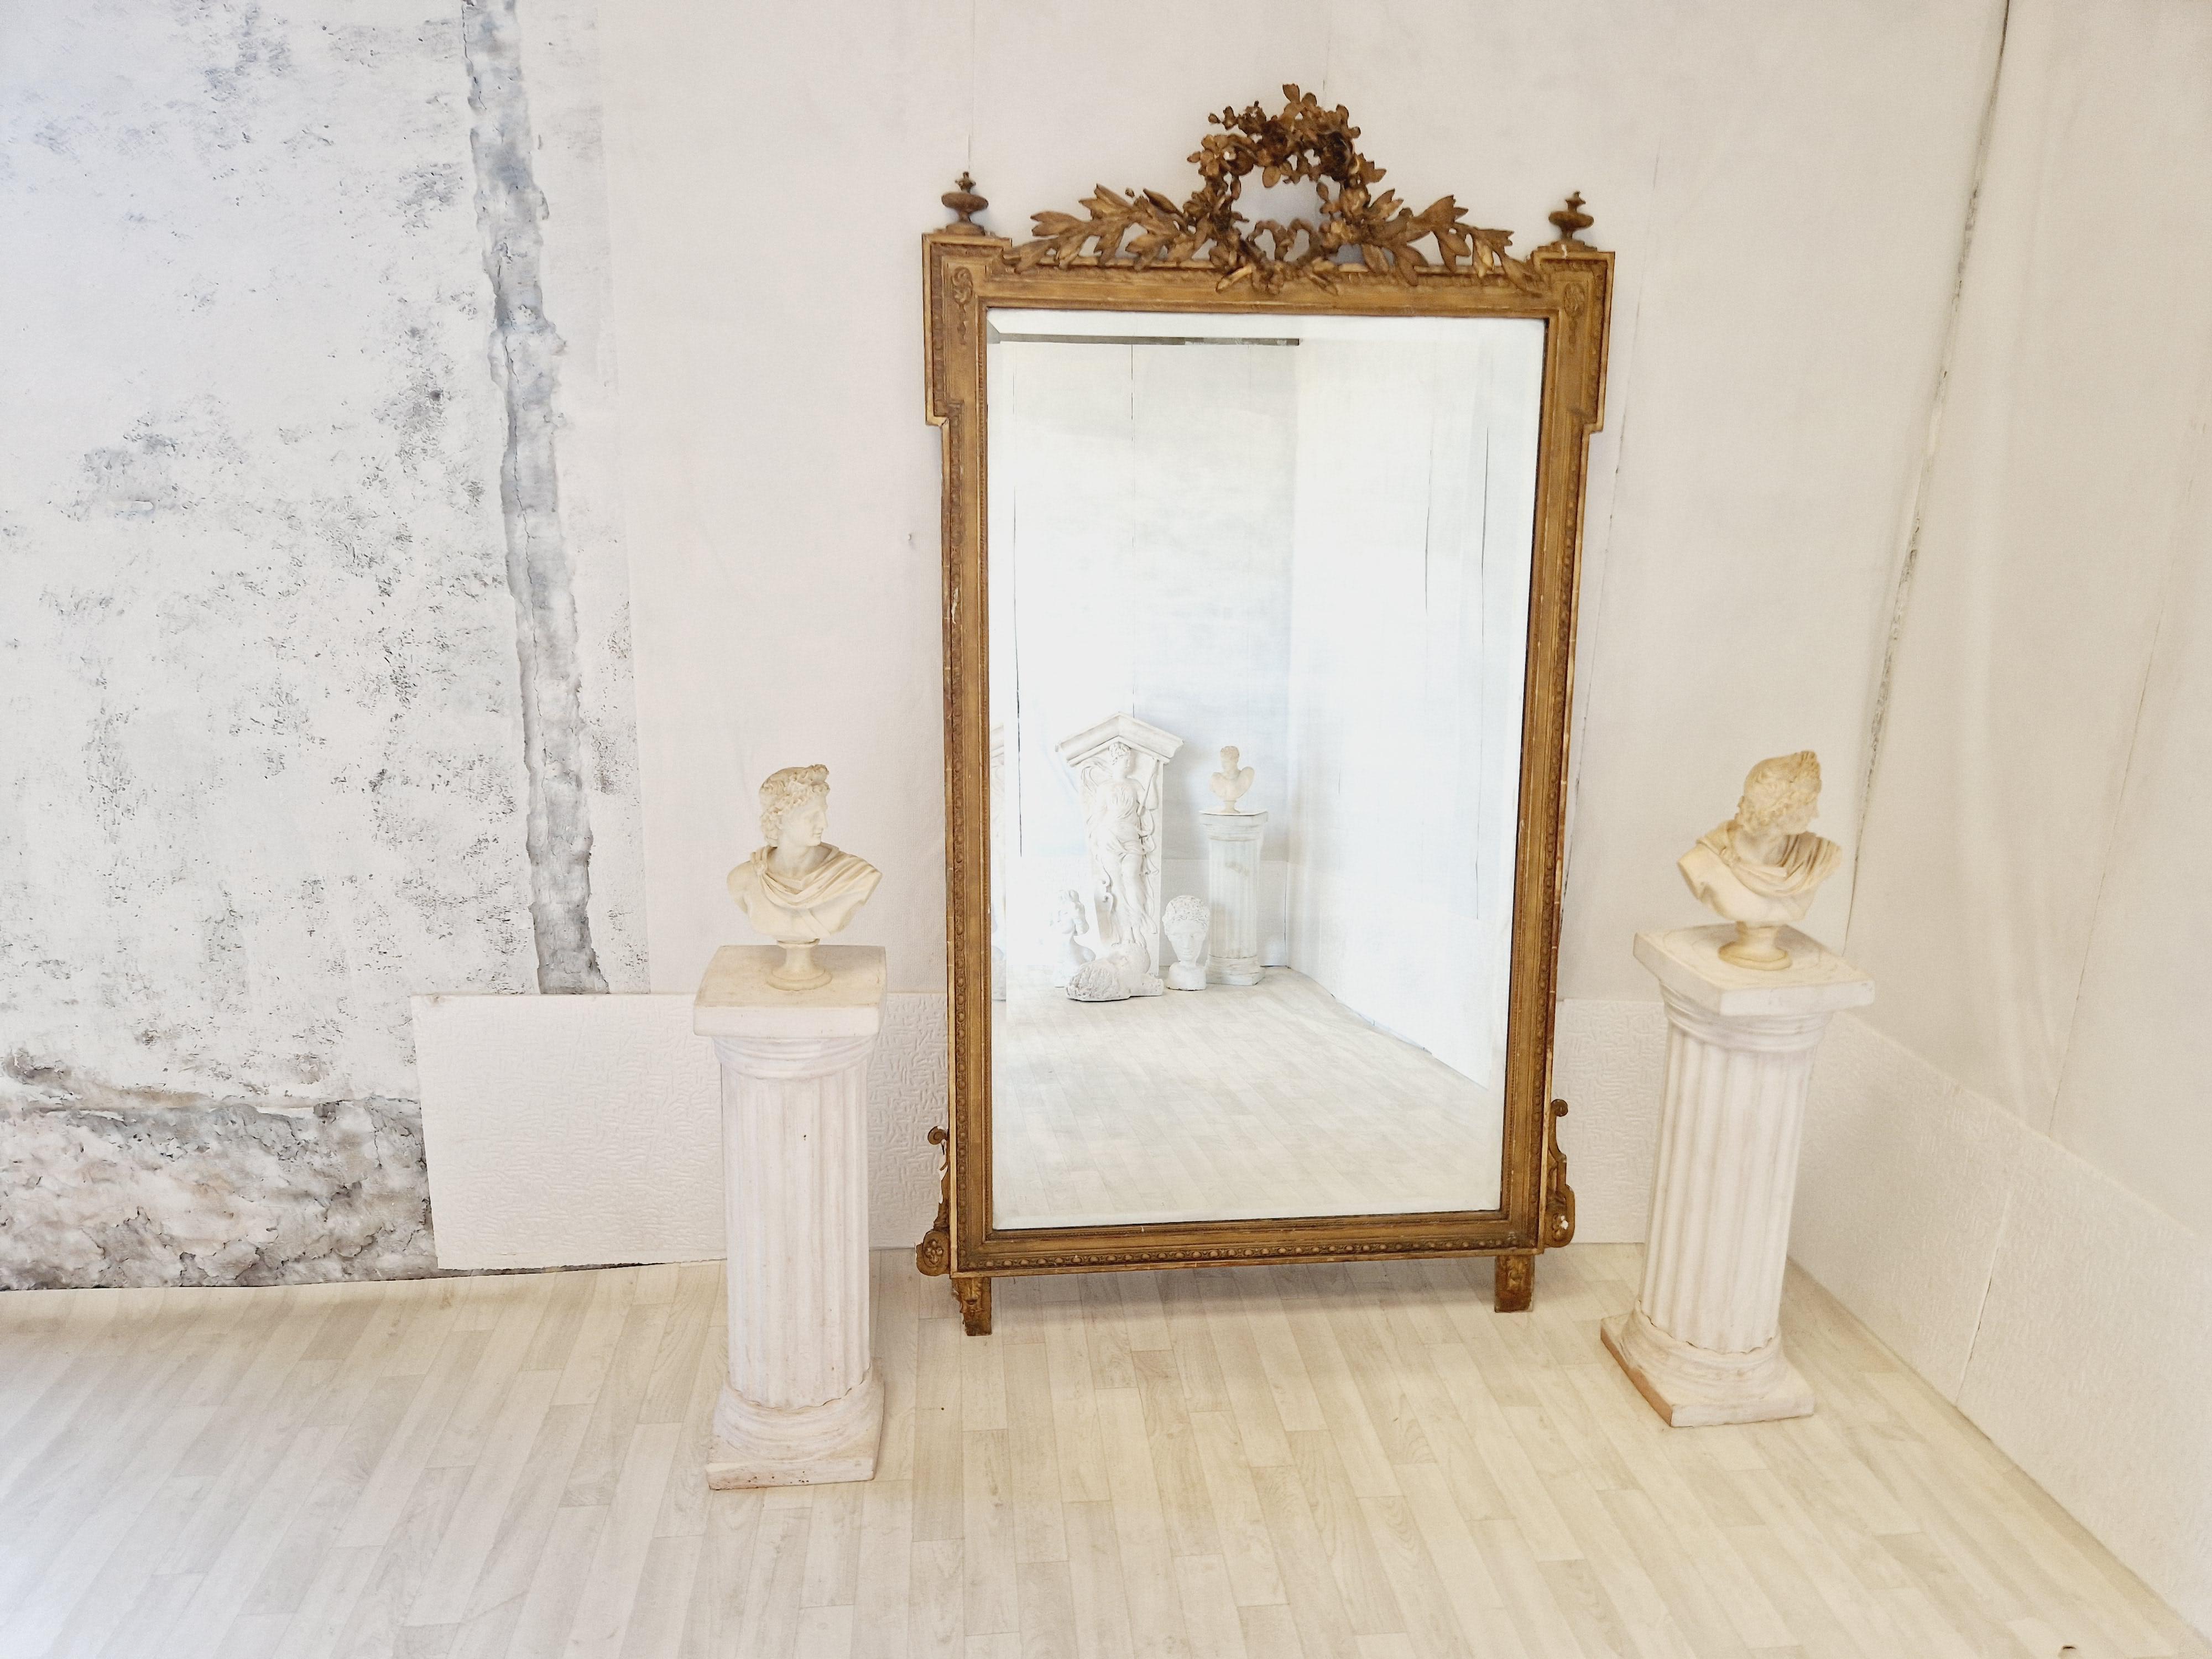 Add a touch of Antique aesthetics and history to your home with this Giltwood framed Louis XVI Style wall/Floor mirror. The rectangular mirror has a height of 200 cm and a width of 107 cm, with a beautiful detailing of Flowers and Acanthus. The